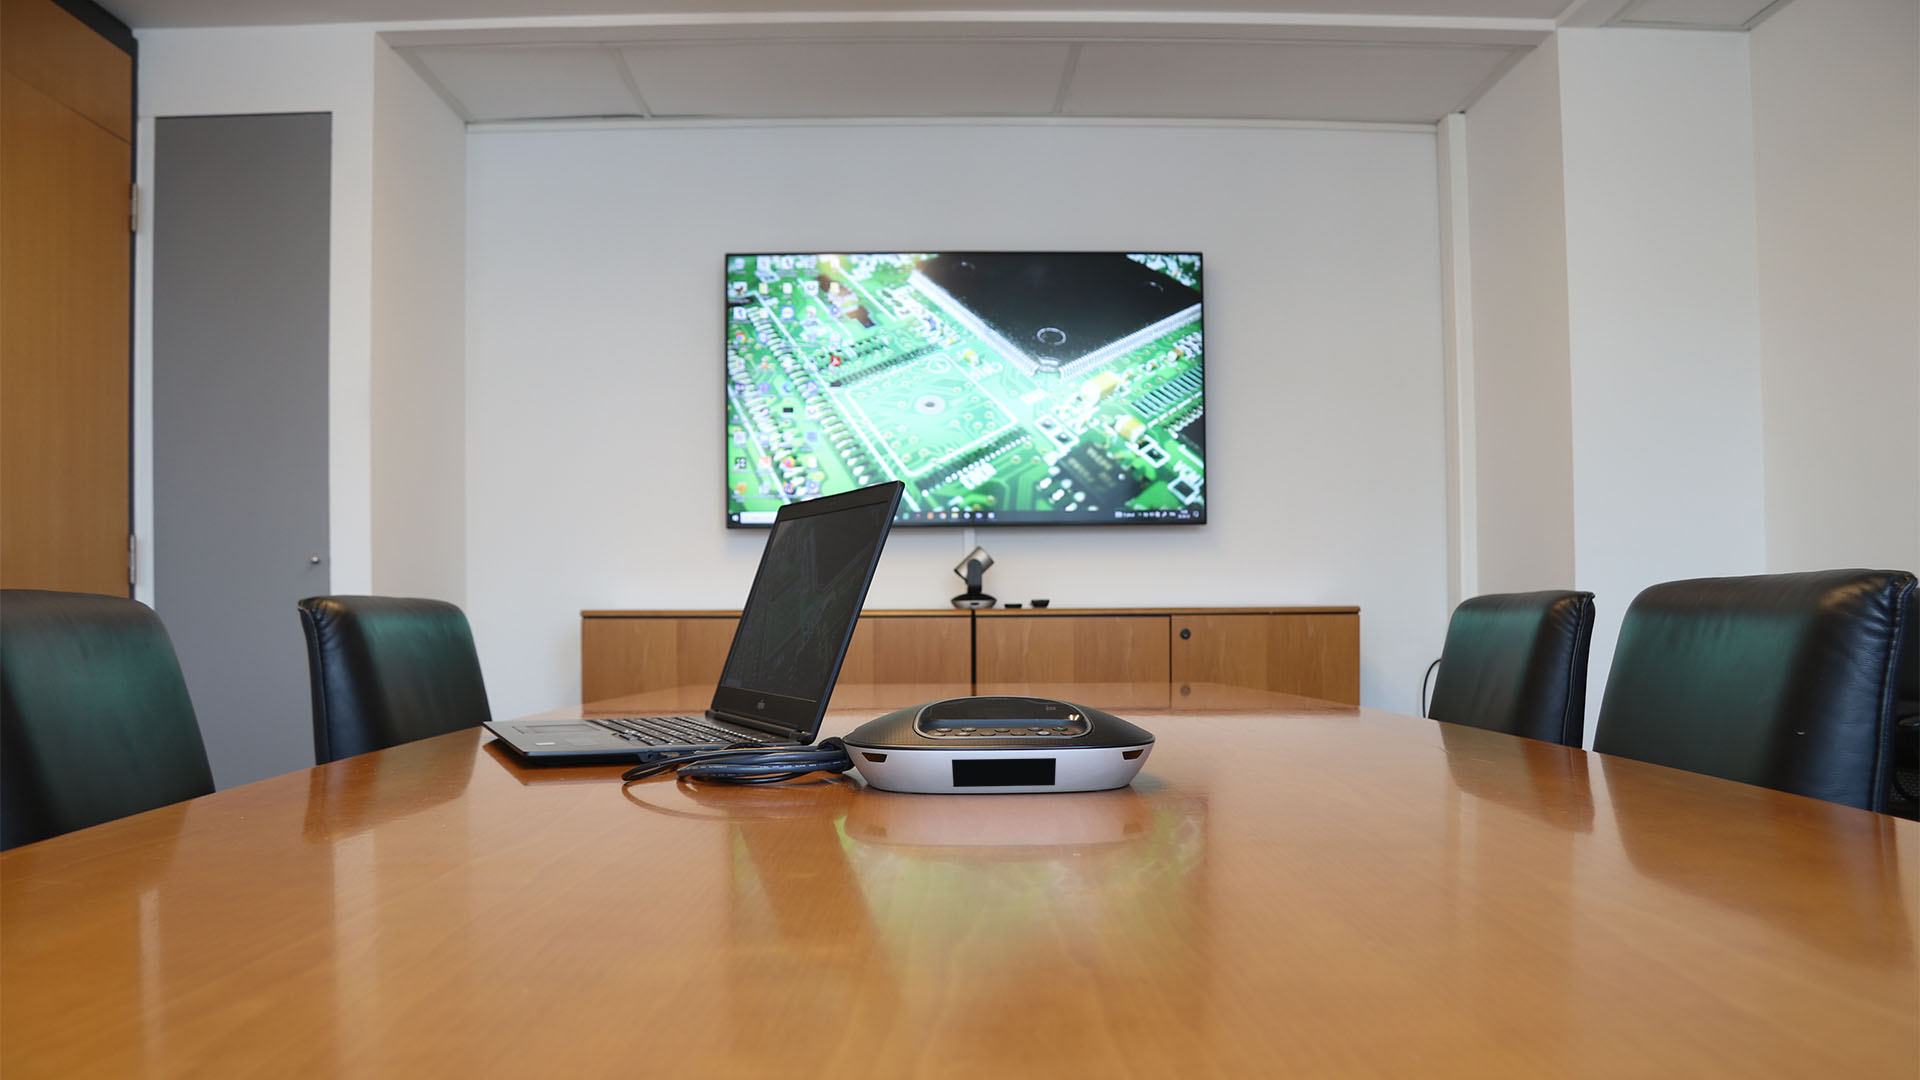 Basic videoconference meeting rooms